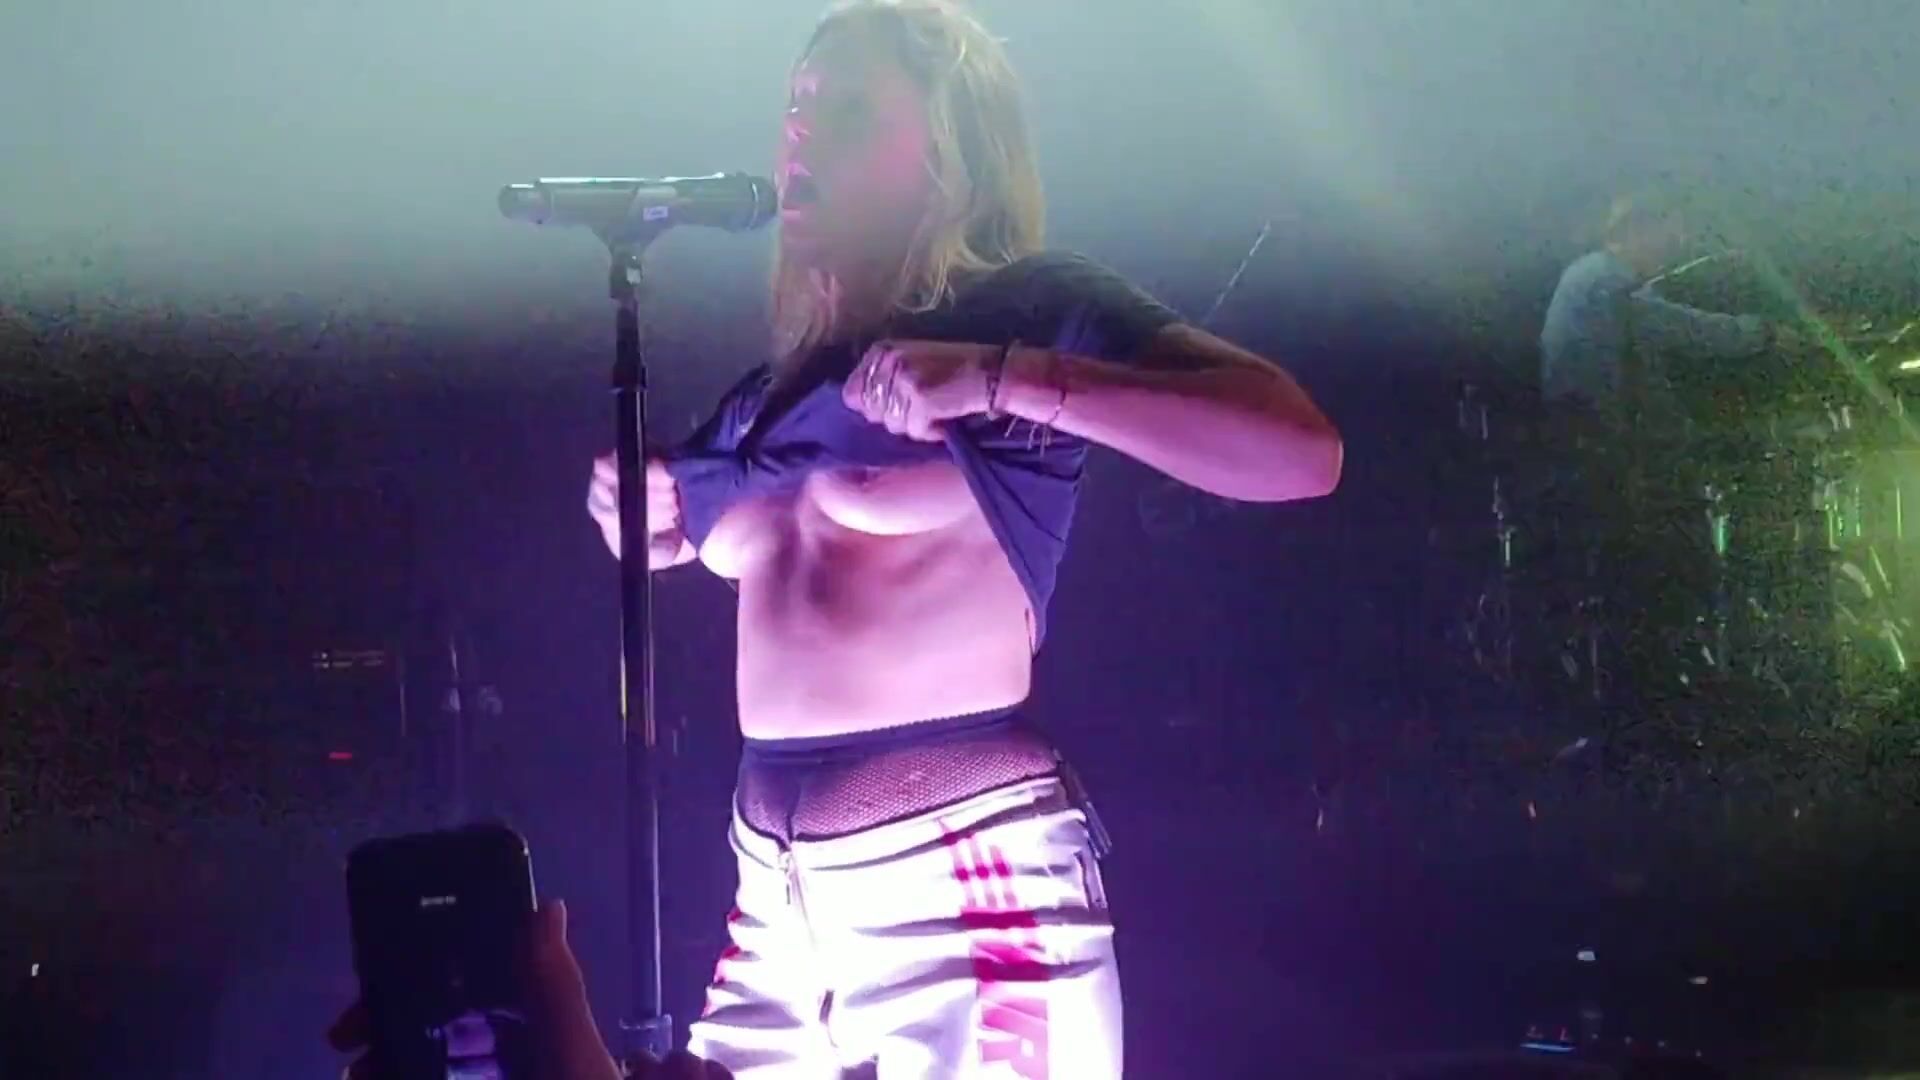 Gang Bang Concert moments full of shame and excitement when Tove Lo nude exposes boobies on stage Shaadi - 2